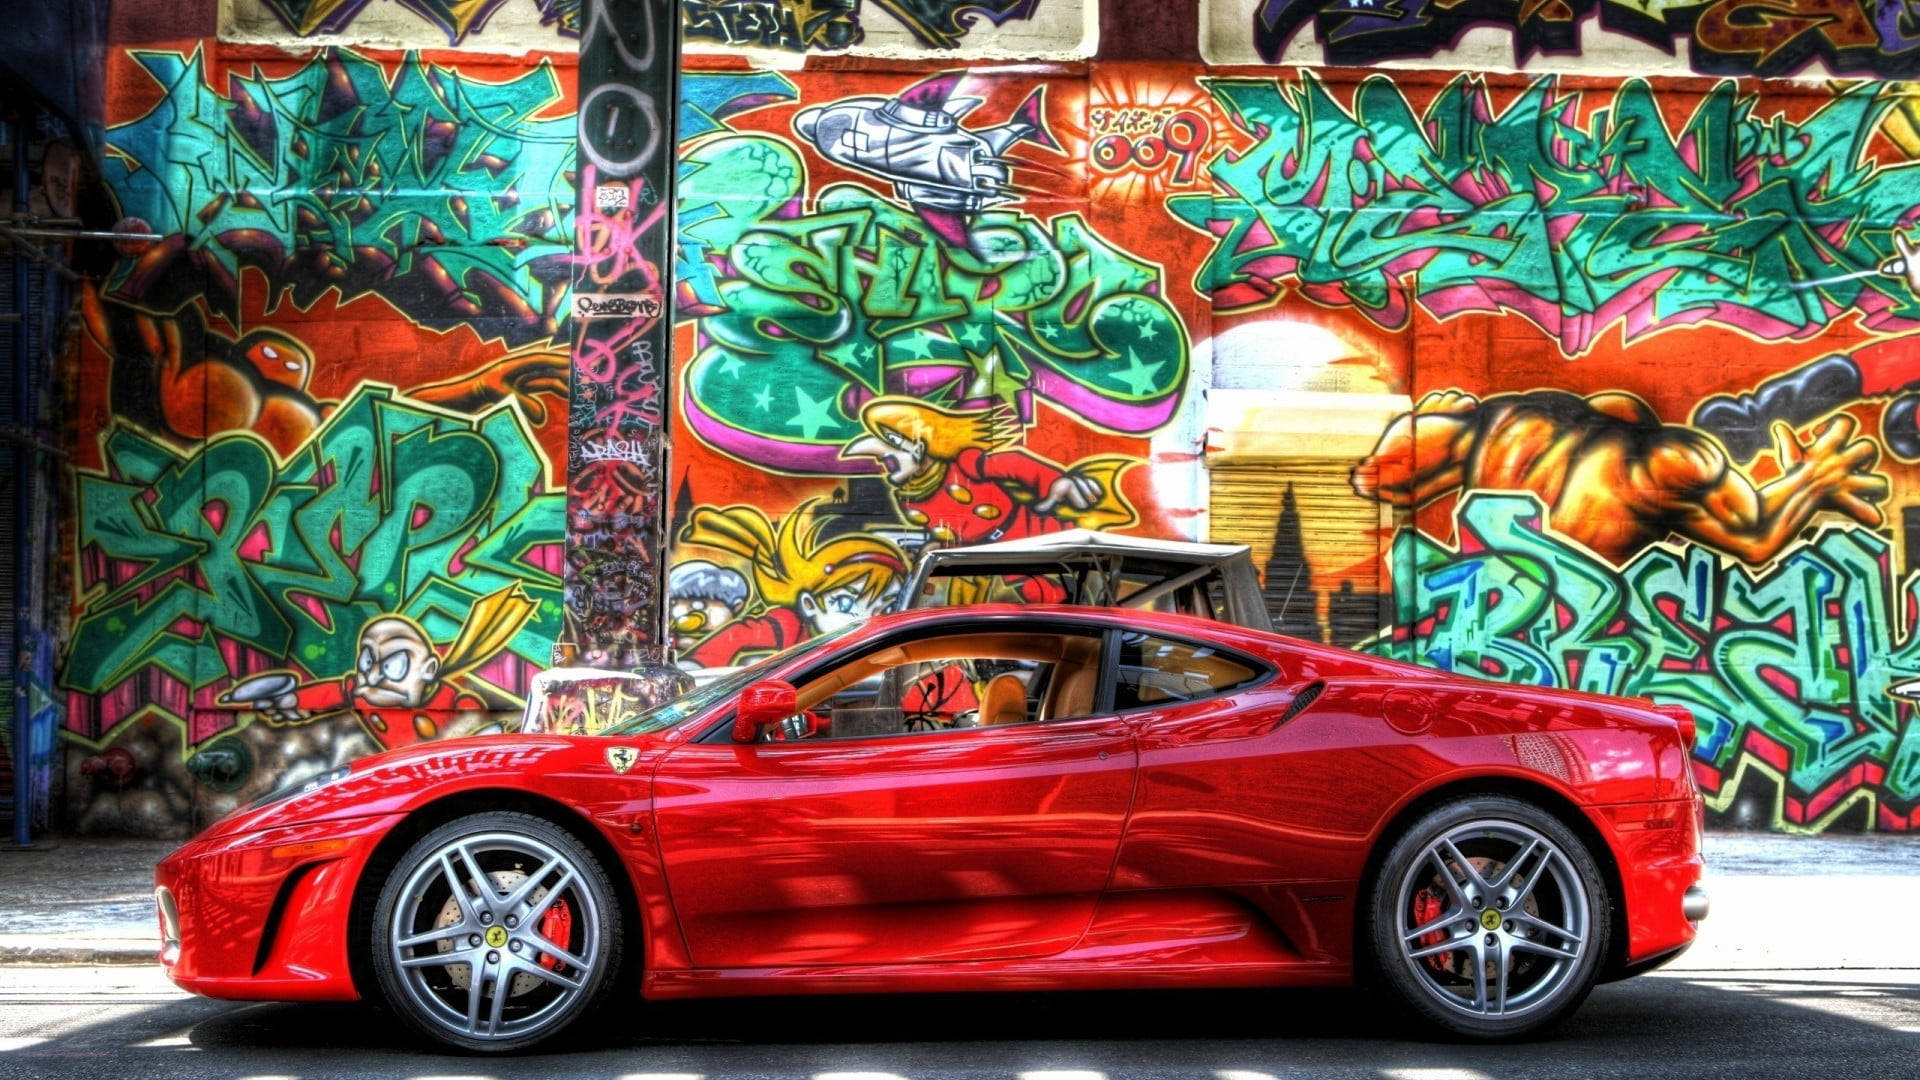 Colorful Wall And Red Ferrari Ipad Wallpaper